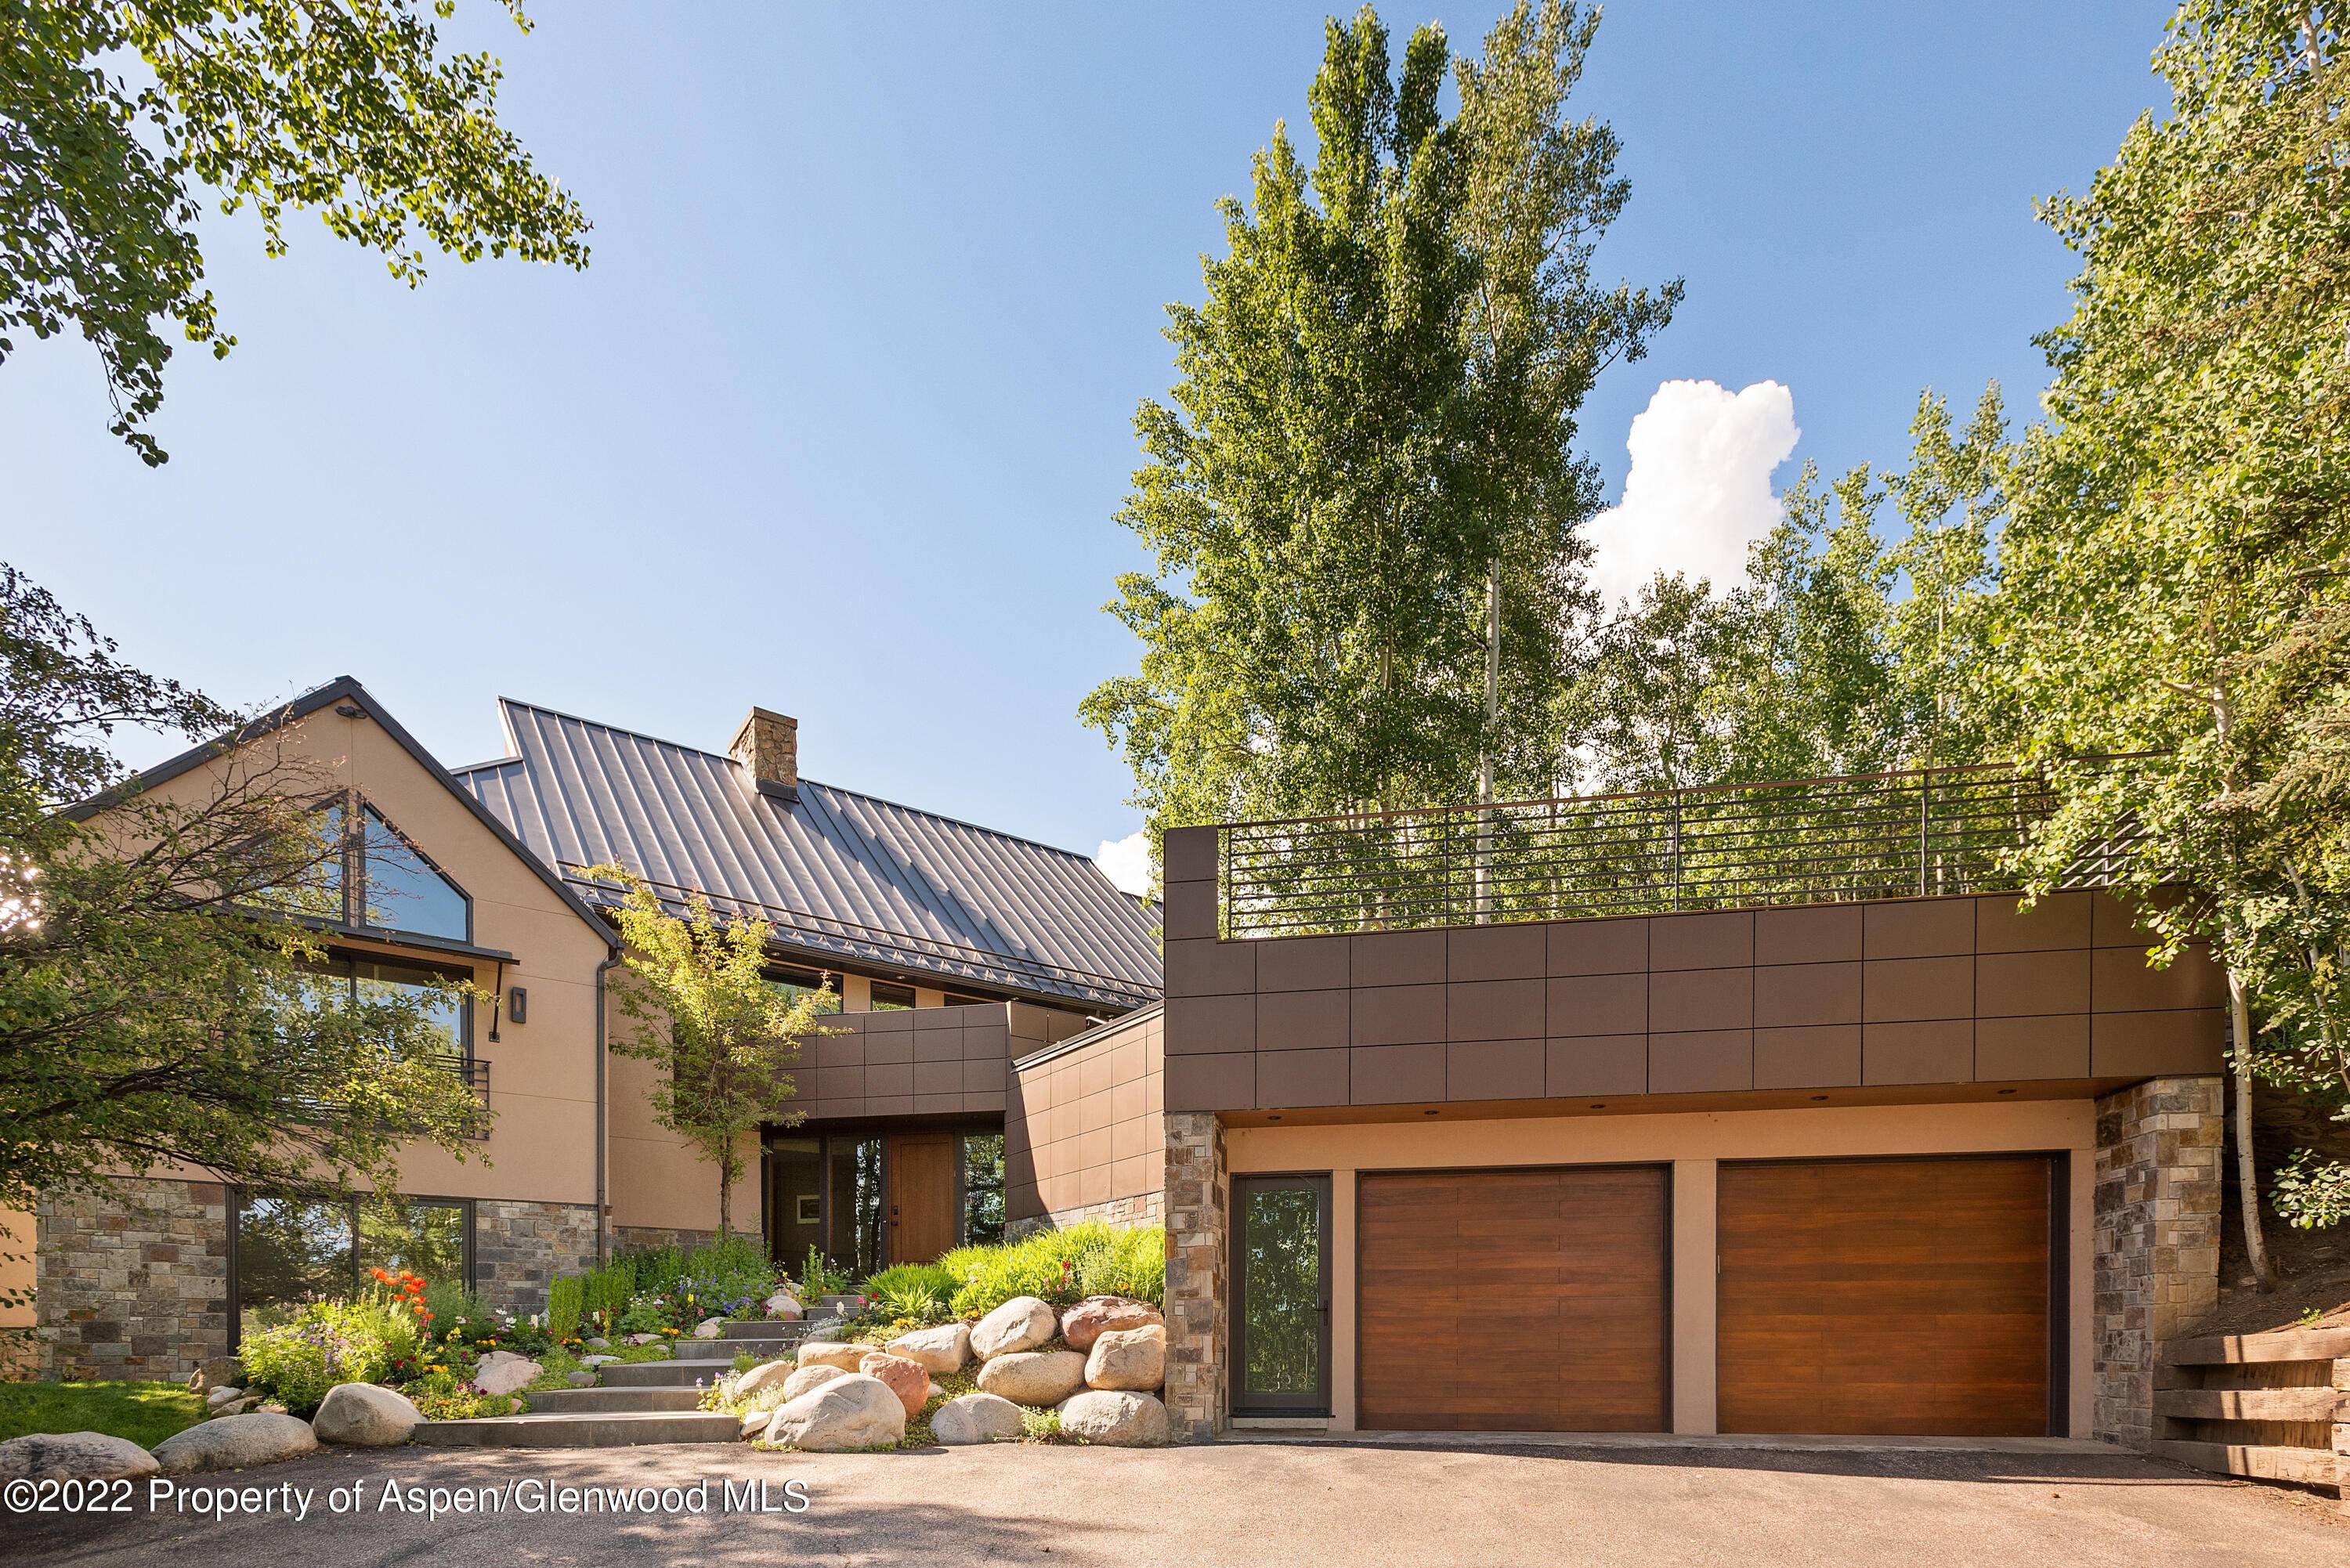 This mountain contemporary home is located in a lovely, private setting just.